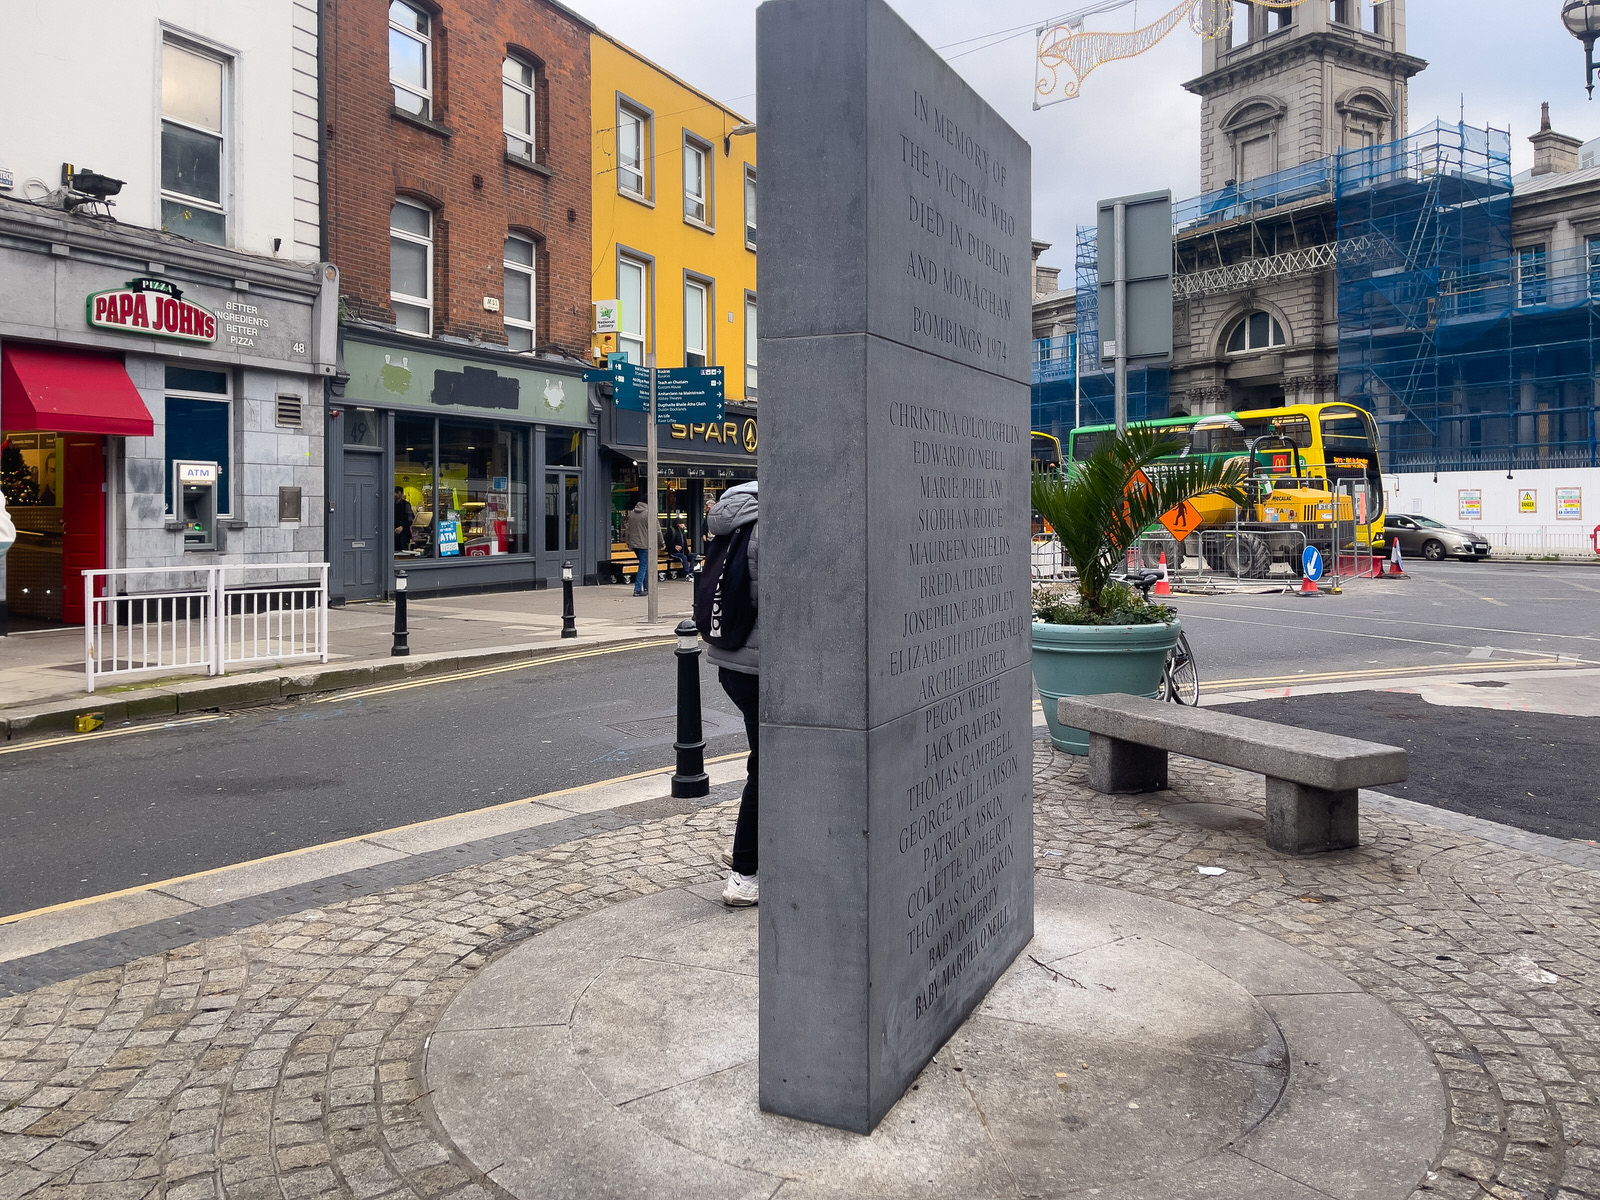 TODAY FELT THAT IT WAS APPROPRIATE TO PHOTOGRAPH THE DUBLIN AND MONAGHAN BOMBING MEMORIAL [THIS IS LOCATED ON TALBOT STREET] 002